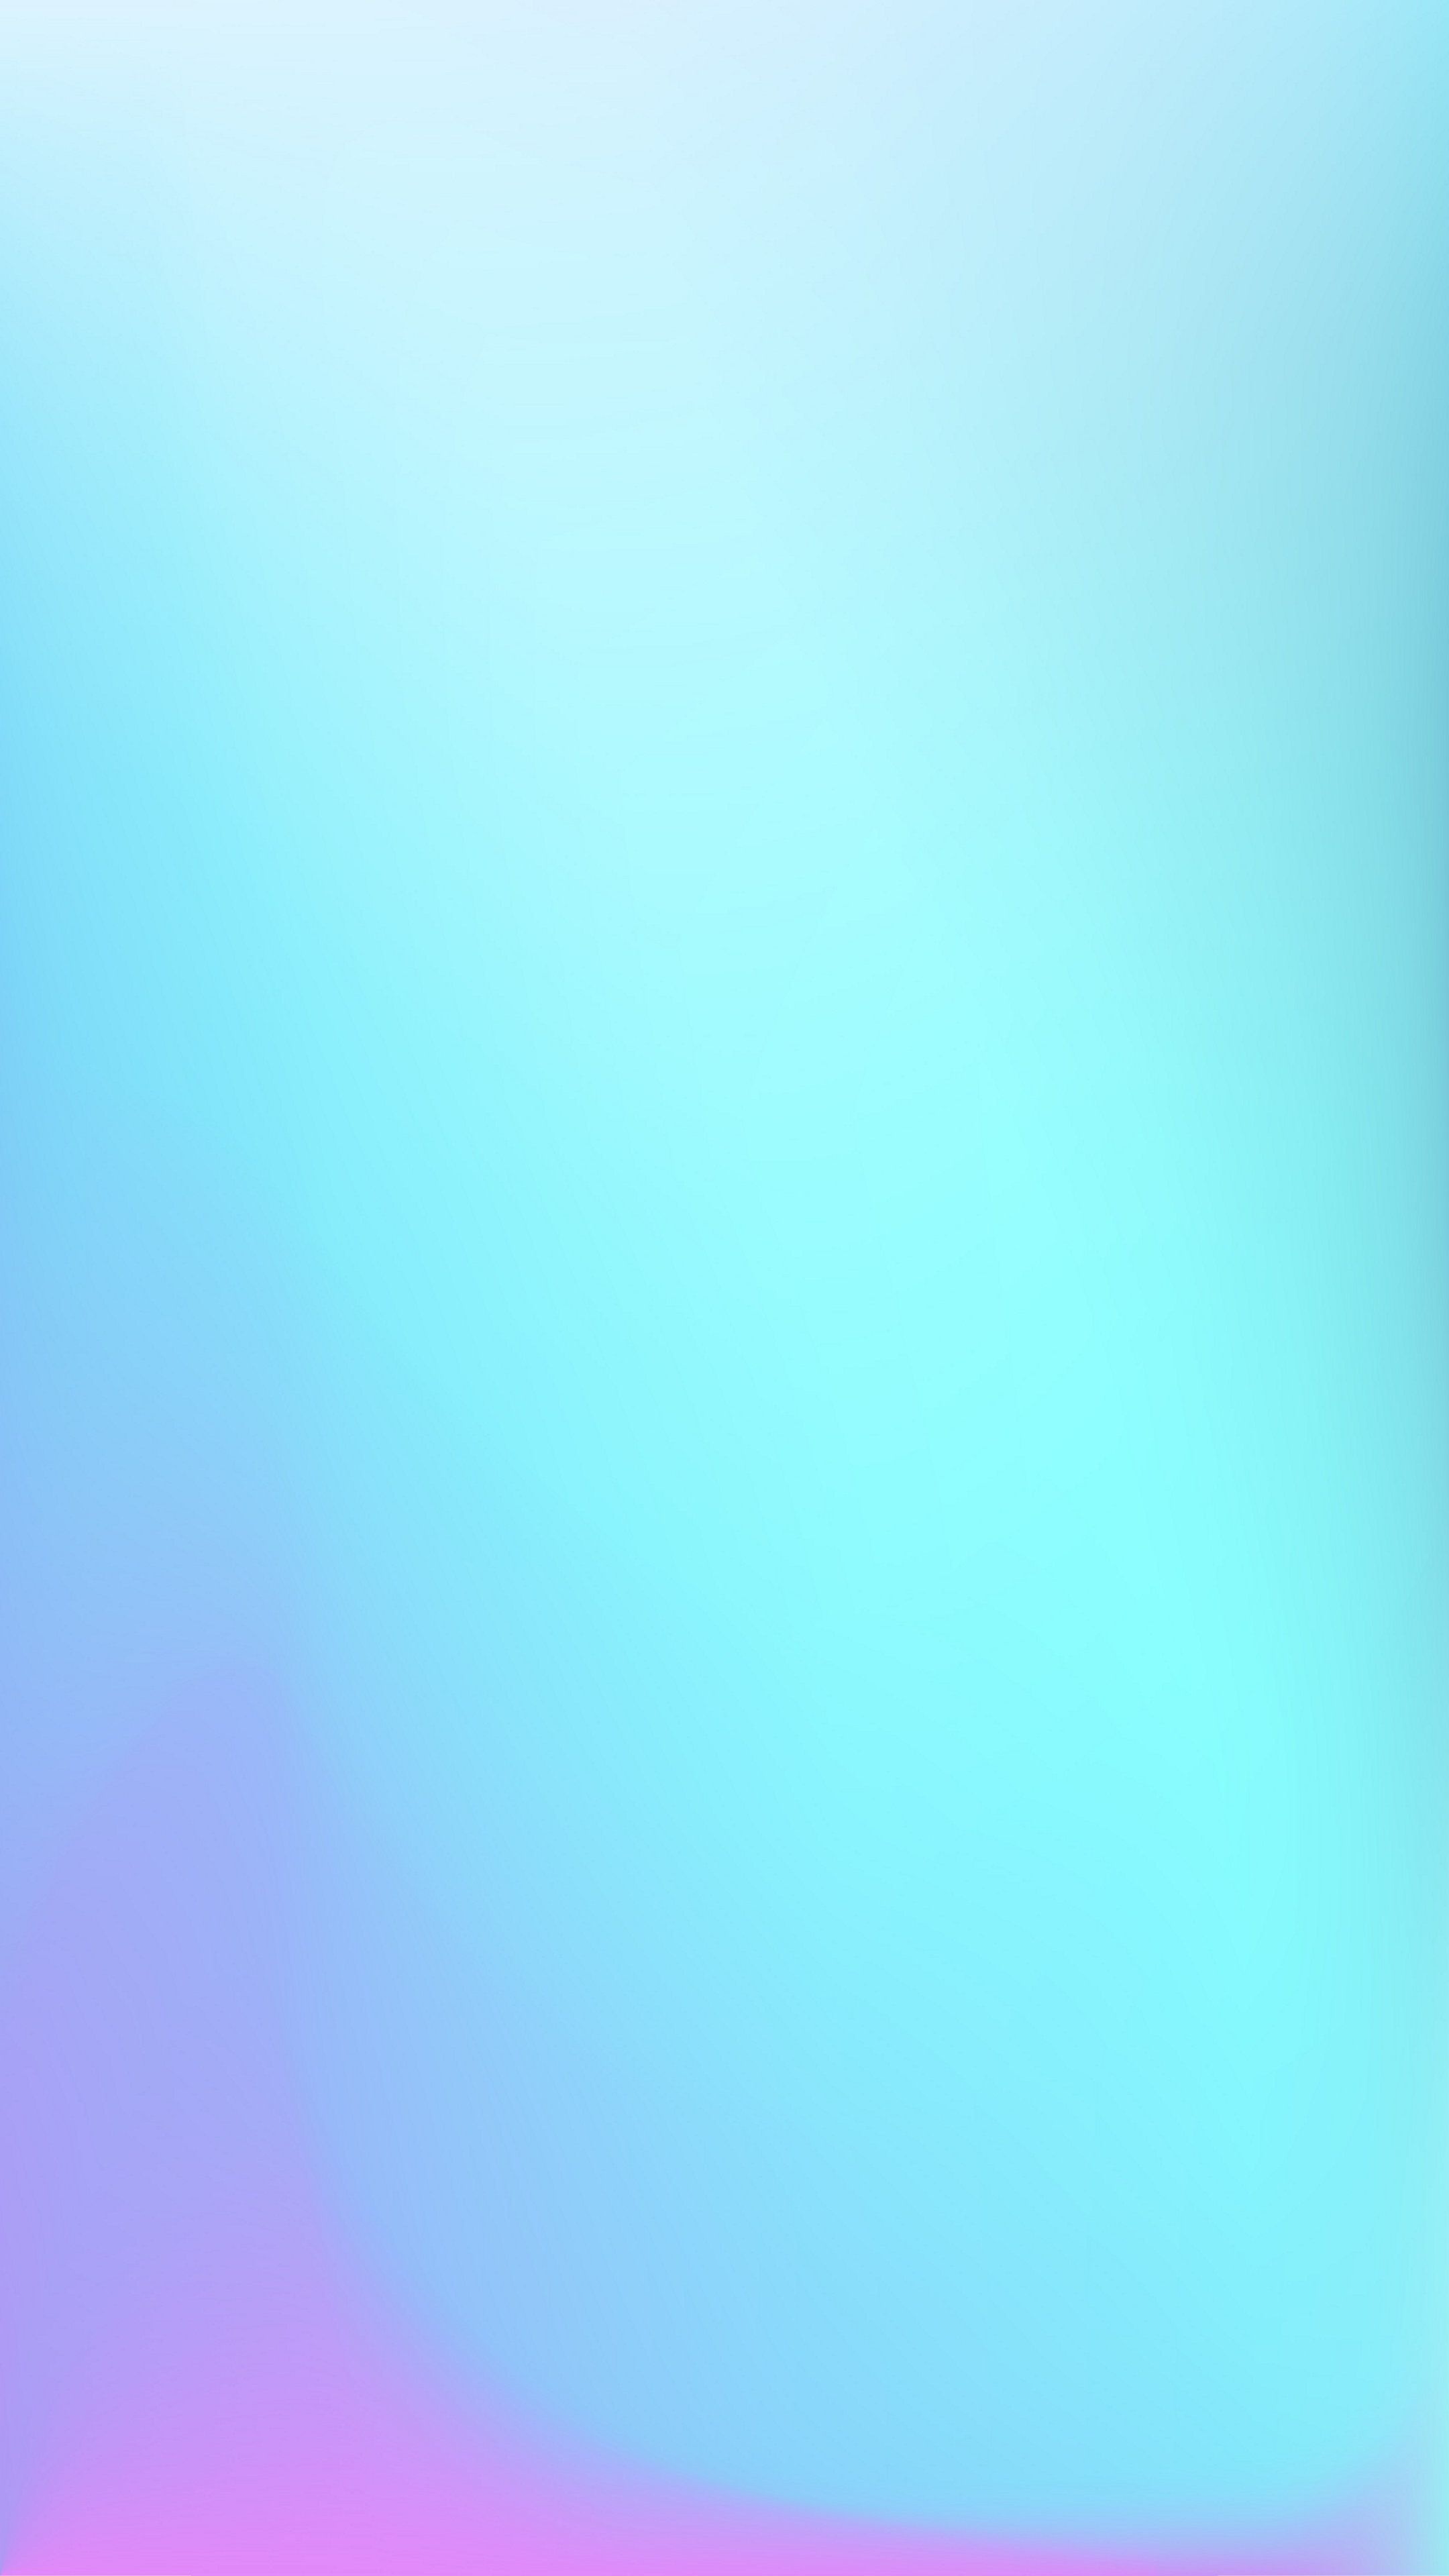 Teal gradient wallpapers, Top free backgrounds, Refreshing color, Calming vibes, 2160x3840 4K Phone